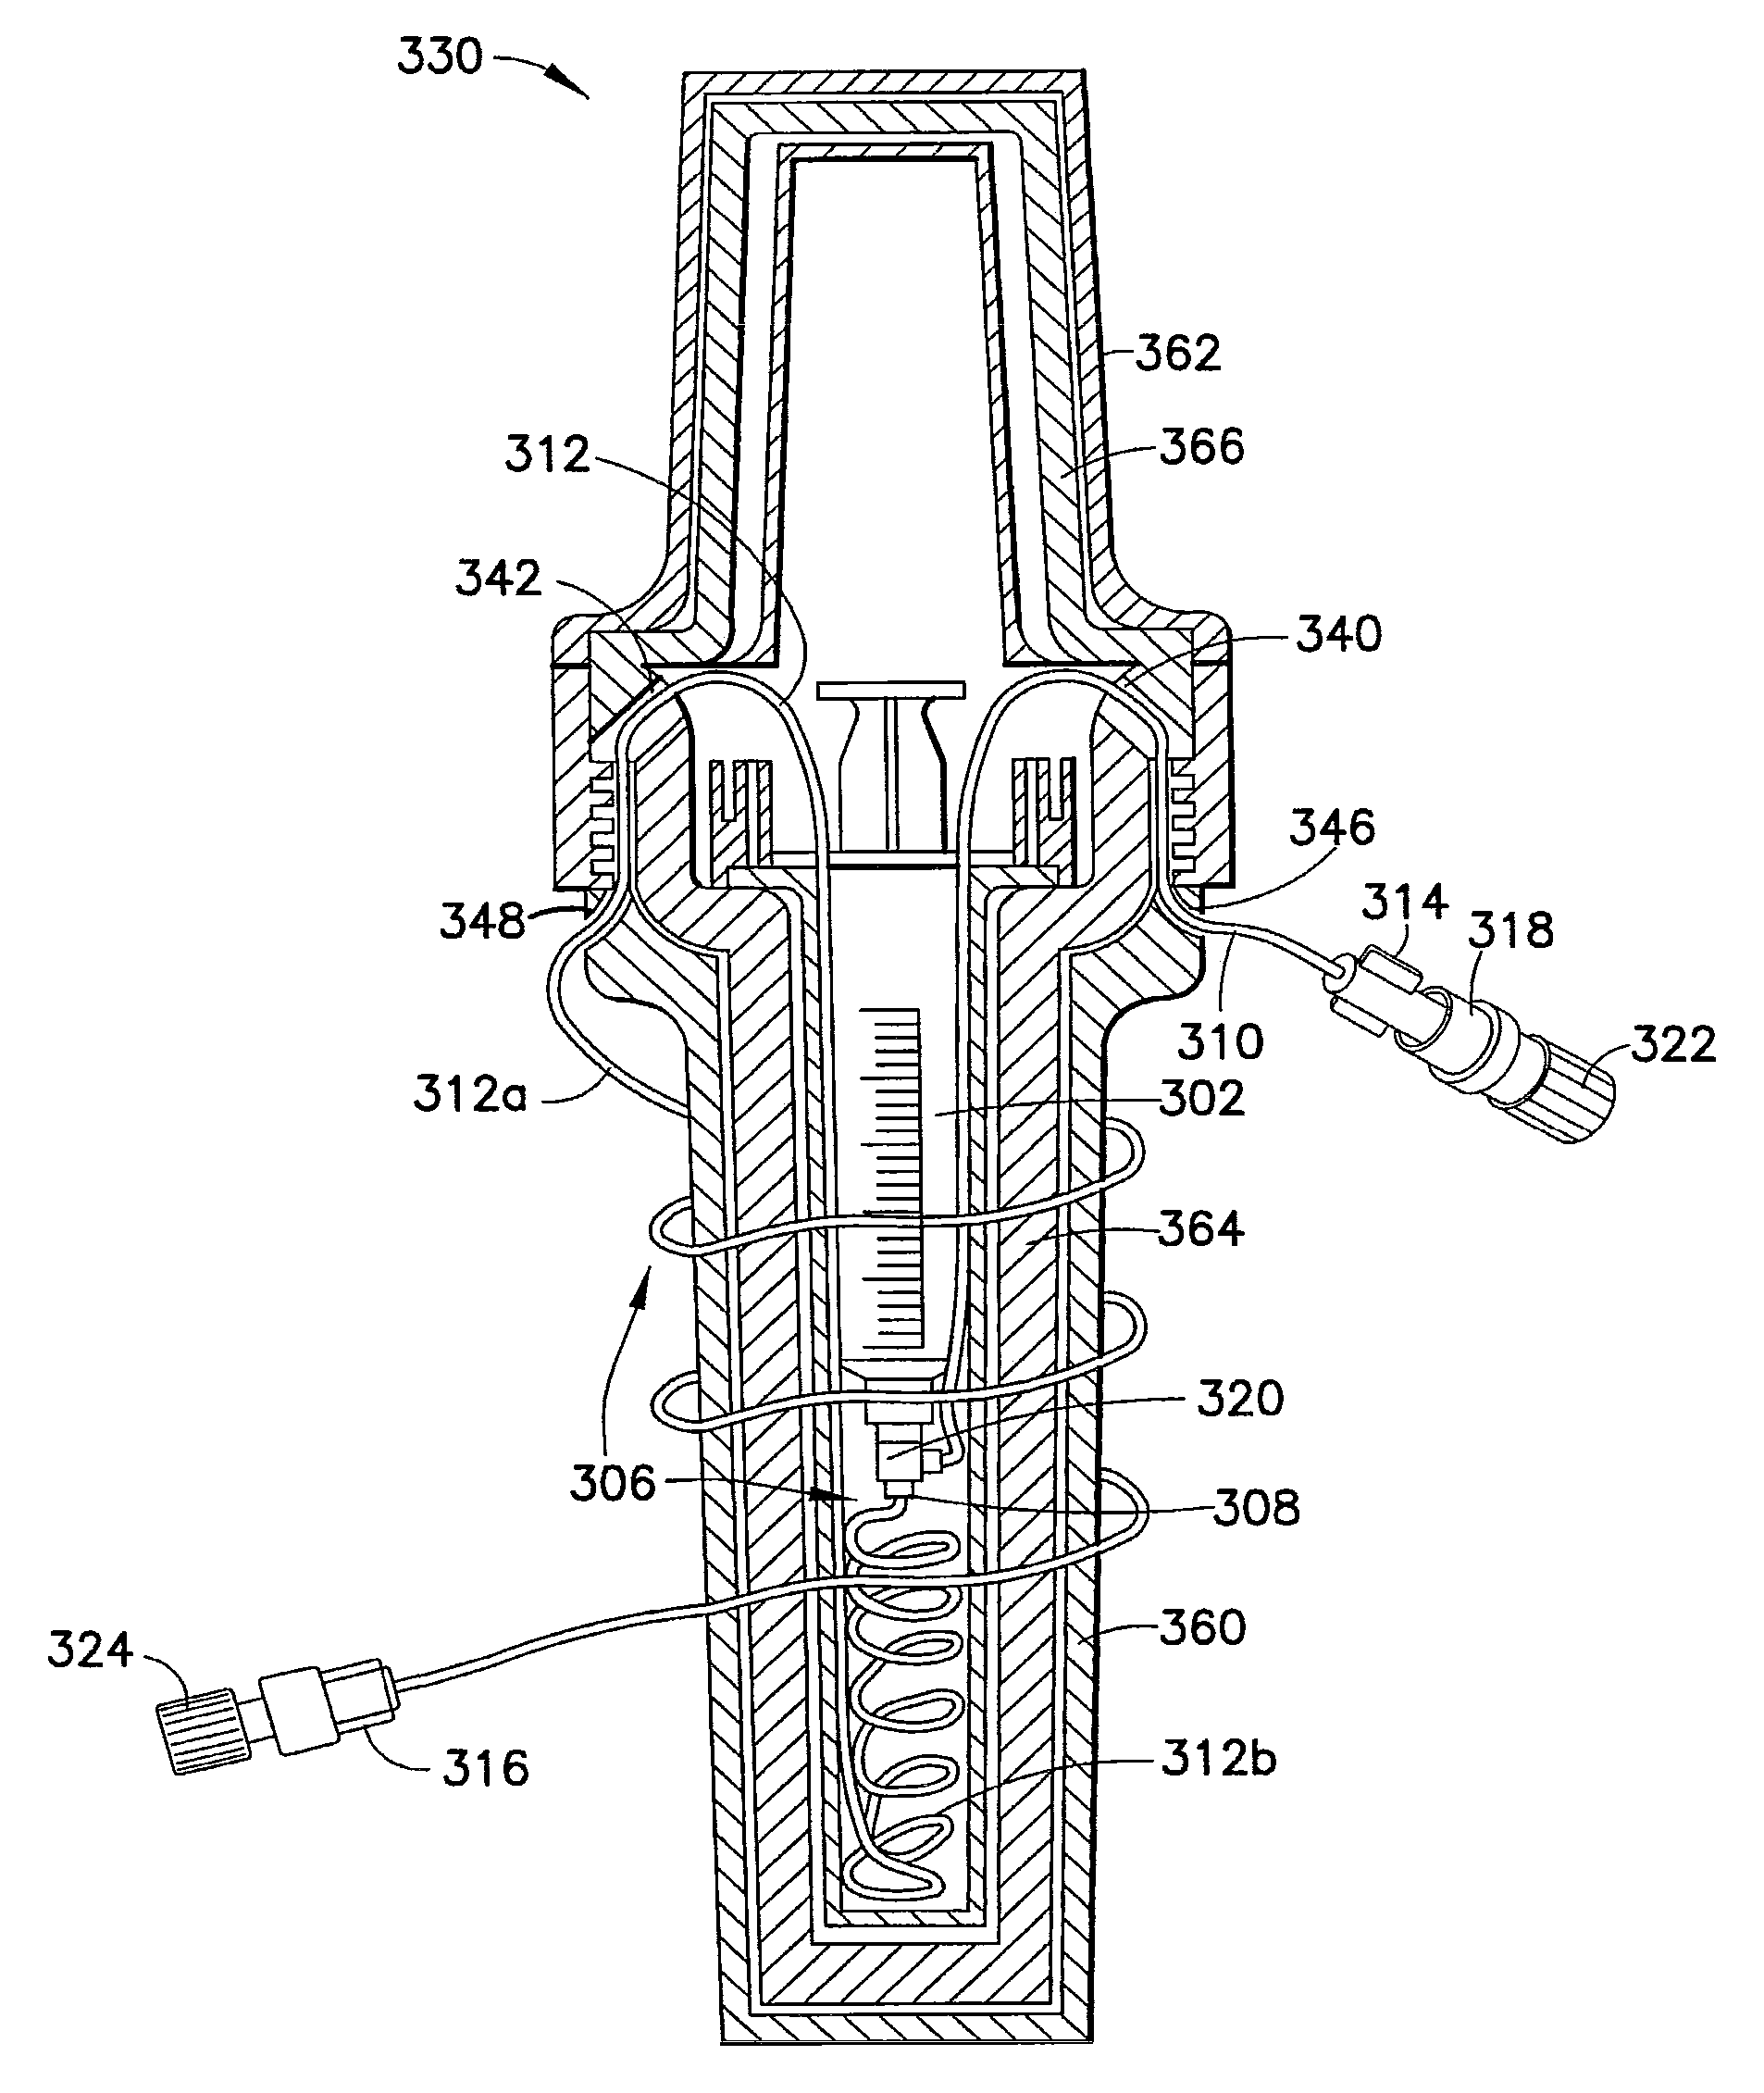 Apparatus and Methods for Delivery of Fluid Injection Boluses to Patients and Handling Harmful Fluids